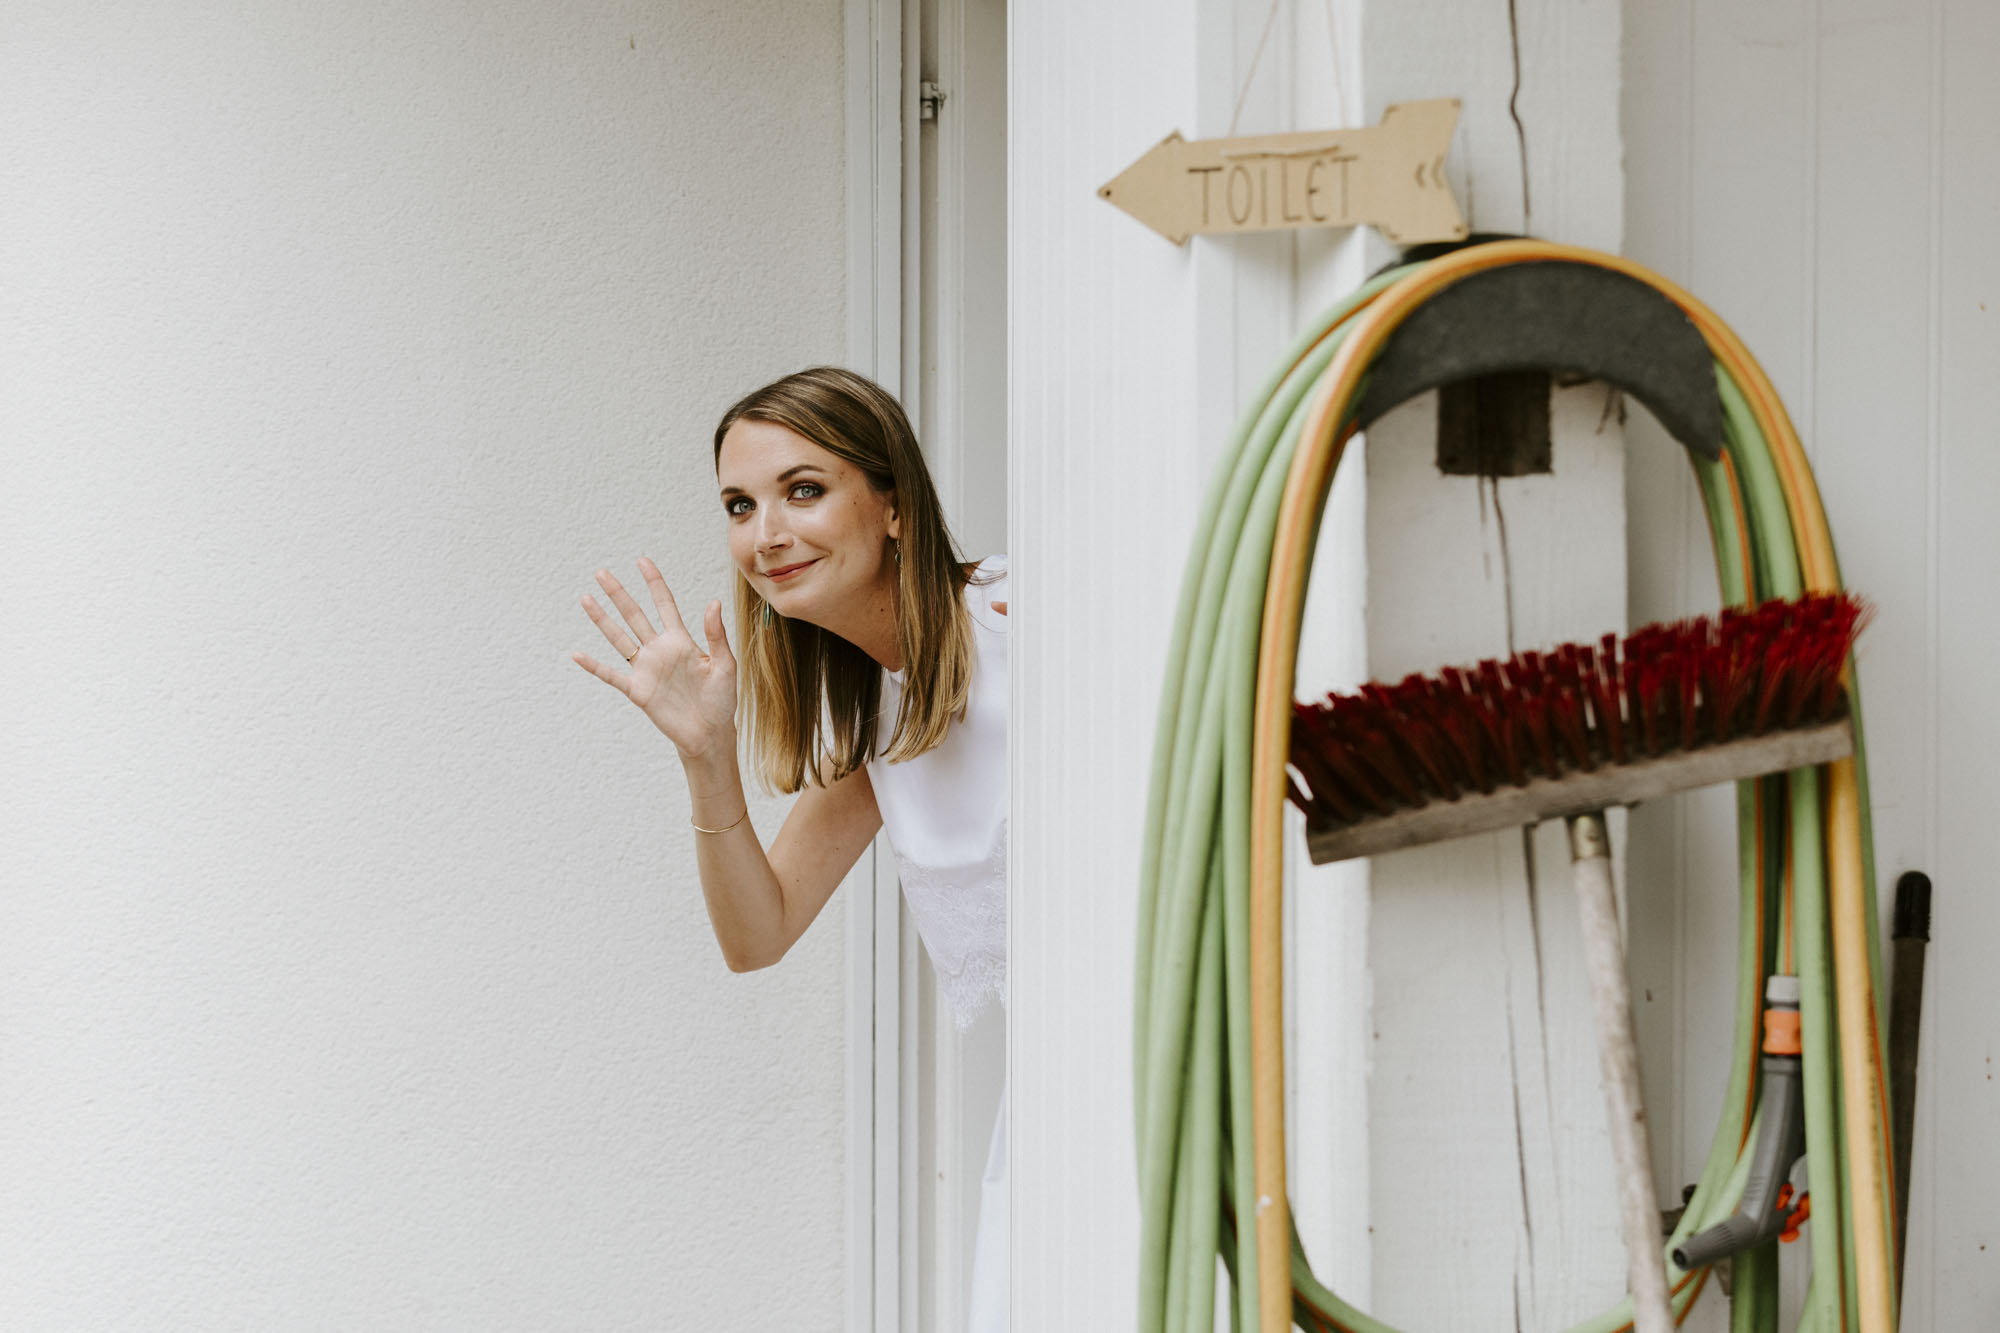 Wedding in Arcachon, France: the bride appears behind a sign that points to the toilets